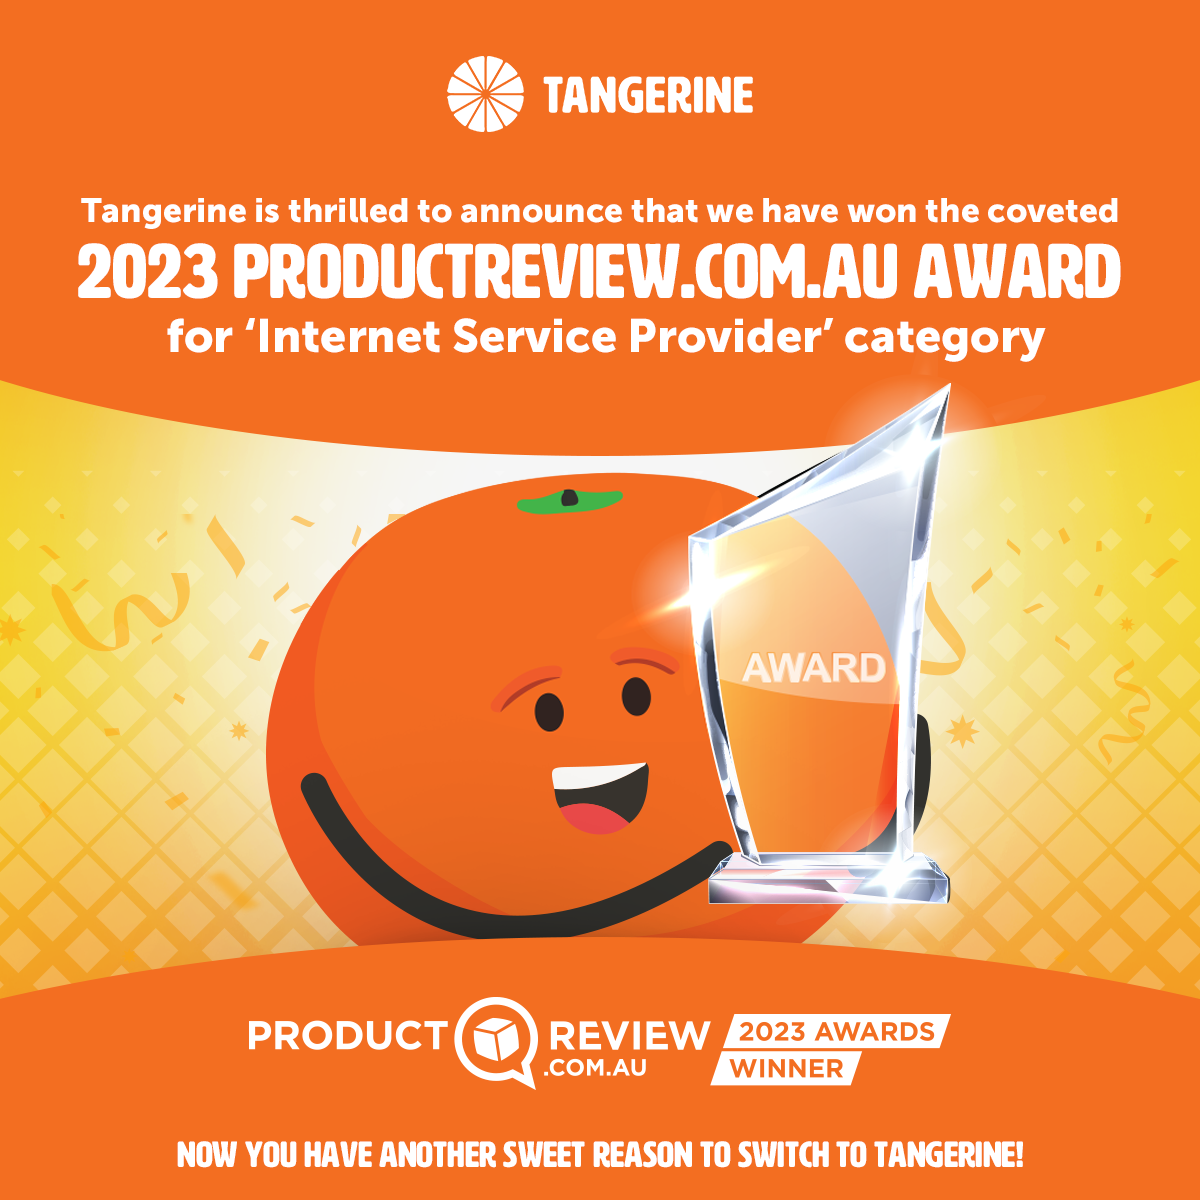 Tangerine Wins 2023 Product Review Award